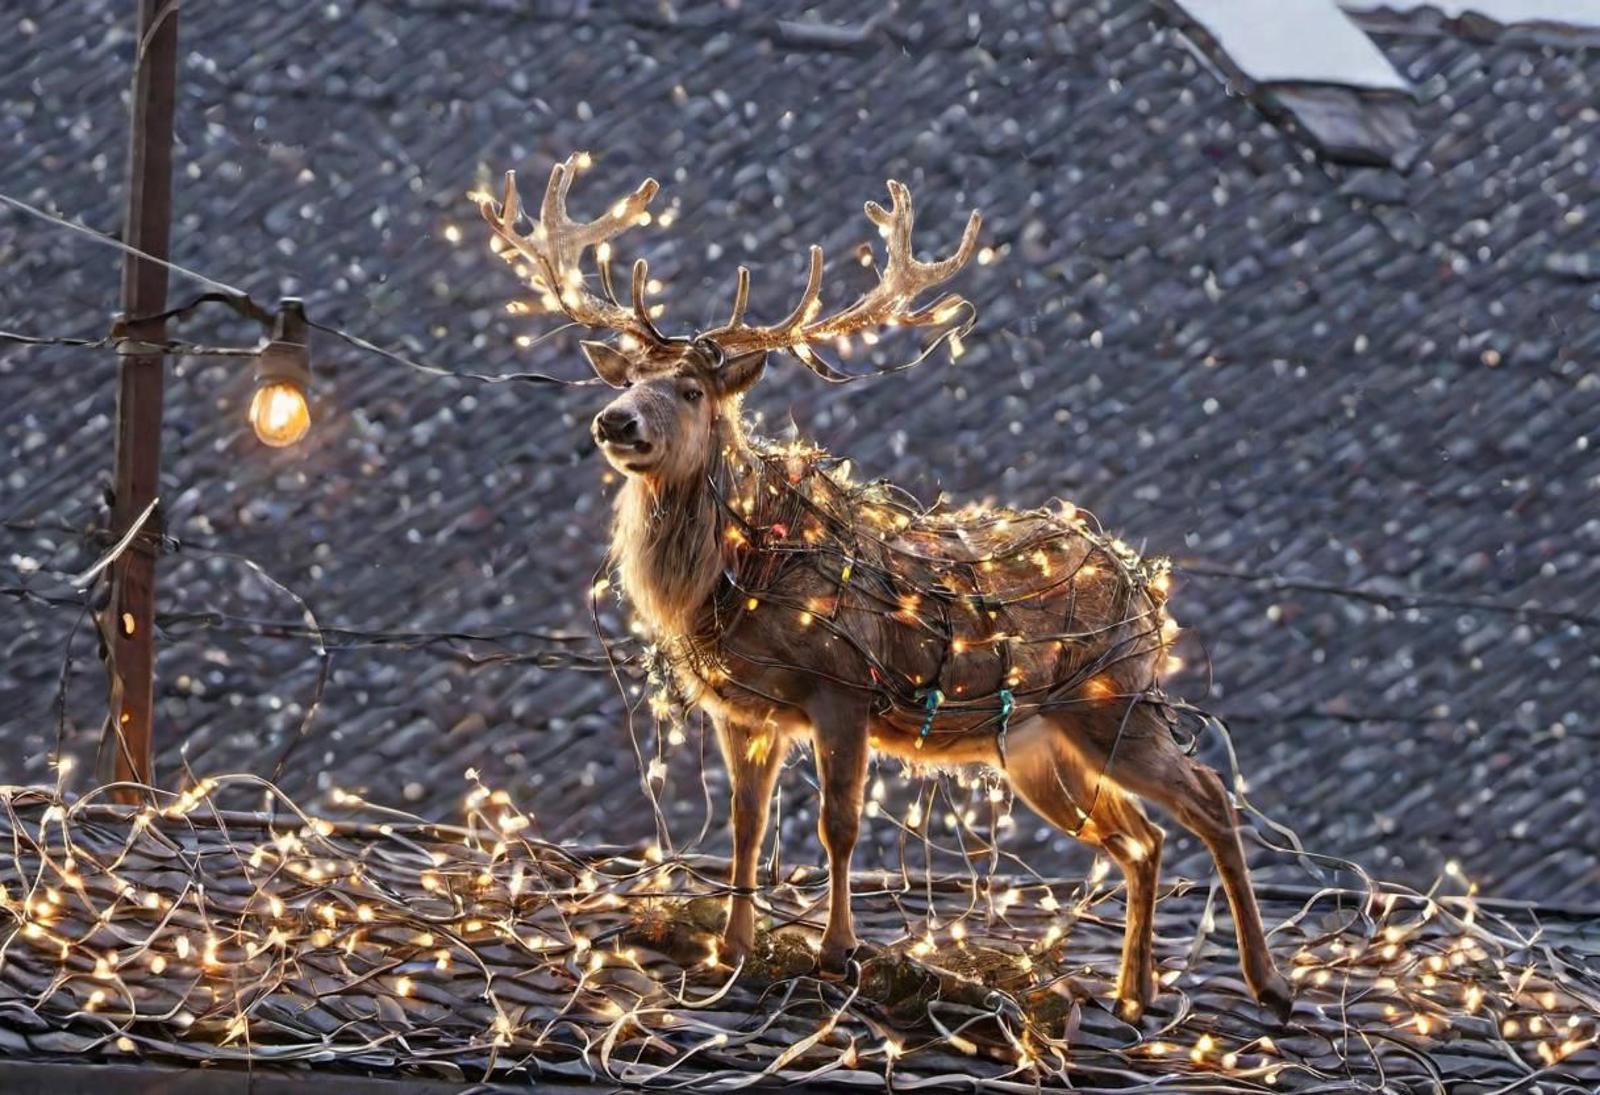 A deer with antlers and lights on its horns is standing on a rooftop.